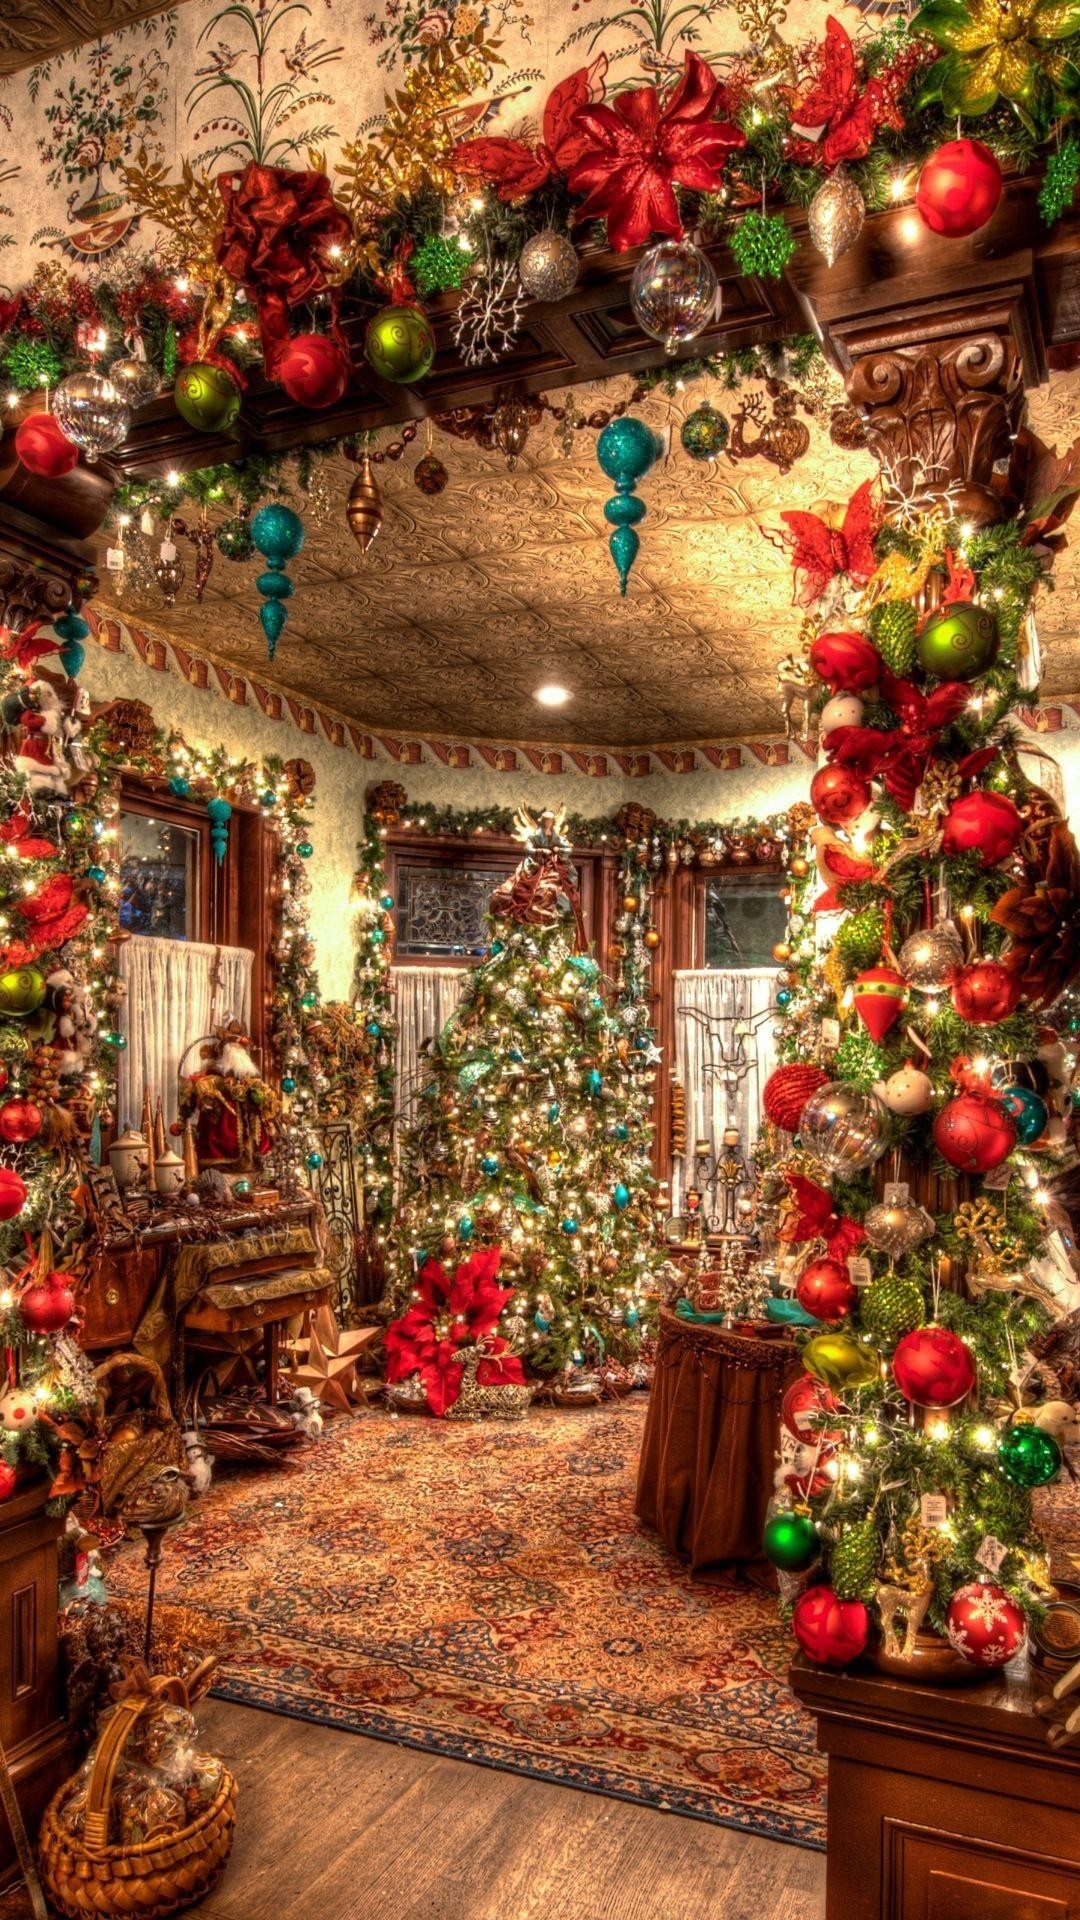 Free download 4K Christmas Wallpaper 51 images [1080x1920] for your